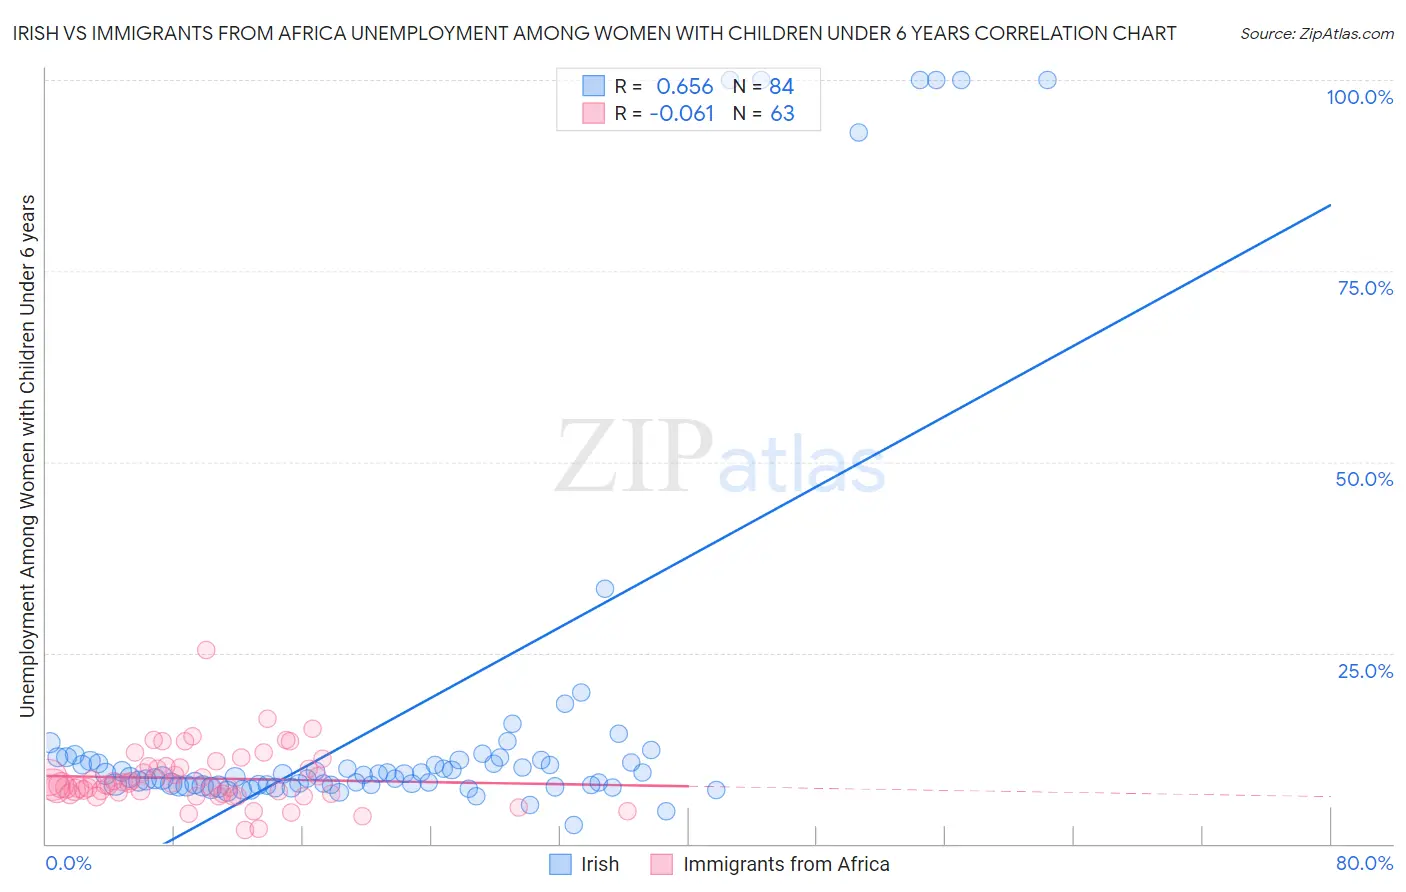 Irish vs Immigrants from Africa Unemployment Among Women with Children Under 6 years